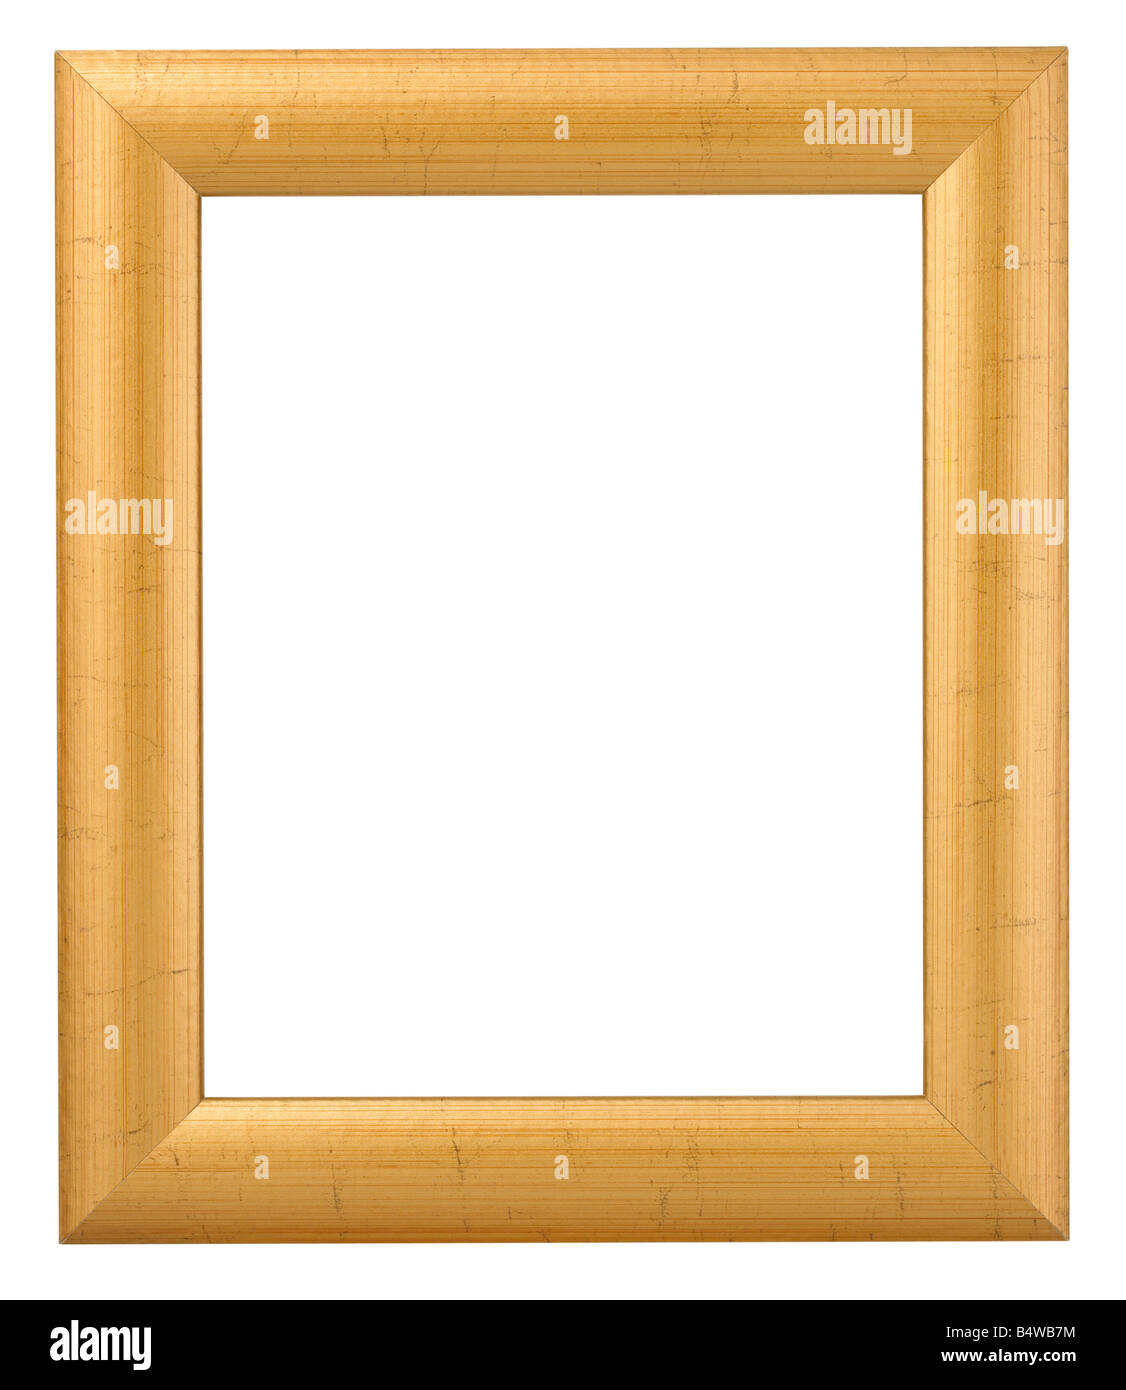 GOLD WOOD PICTURE FRAME Stock Photo